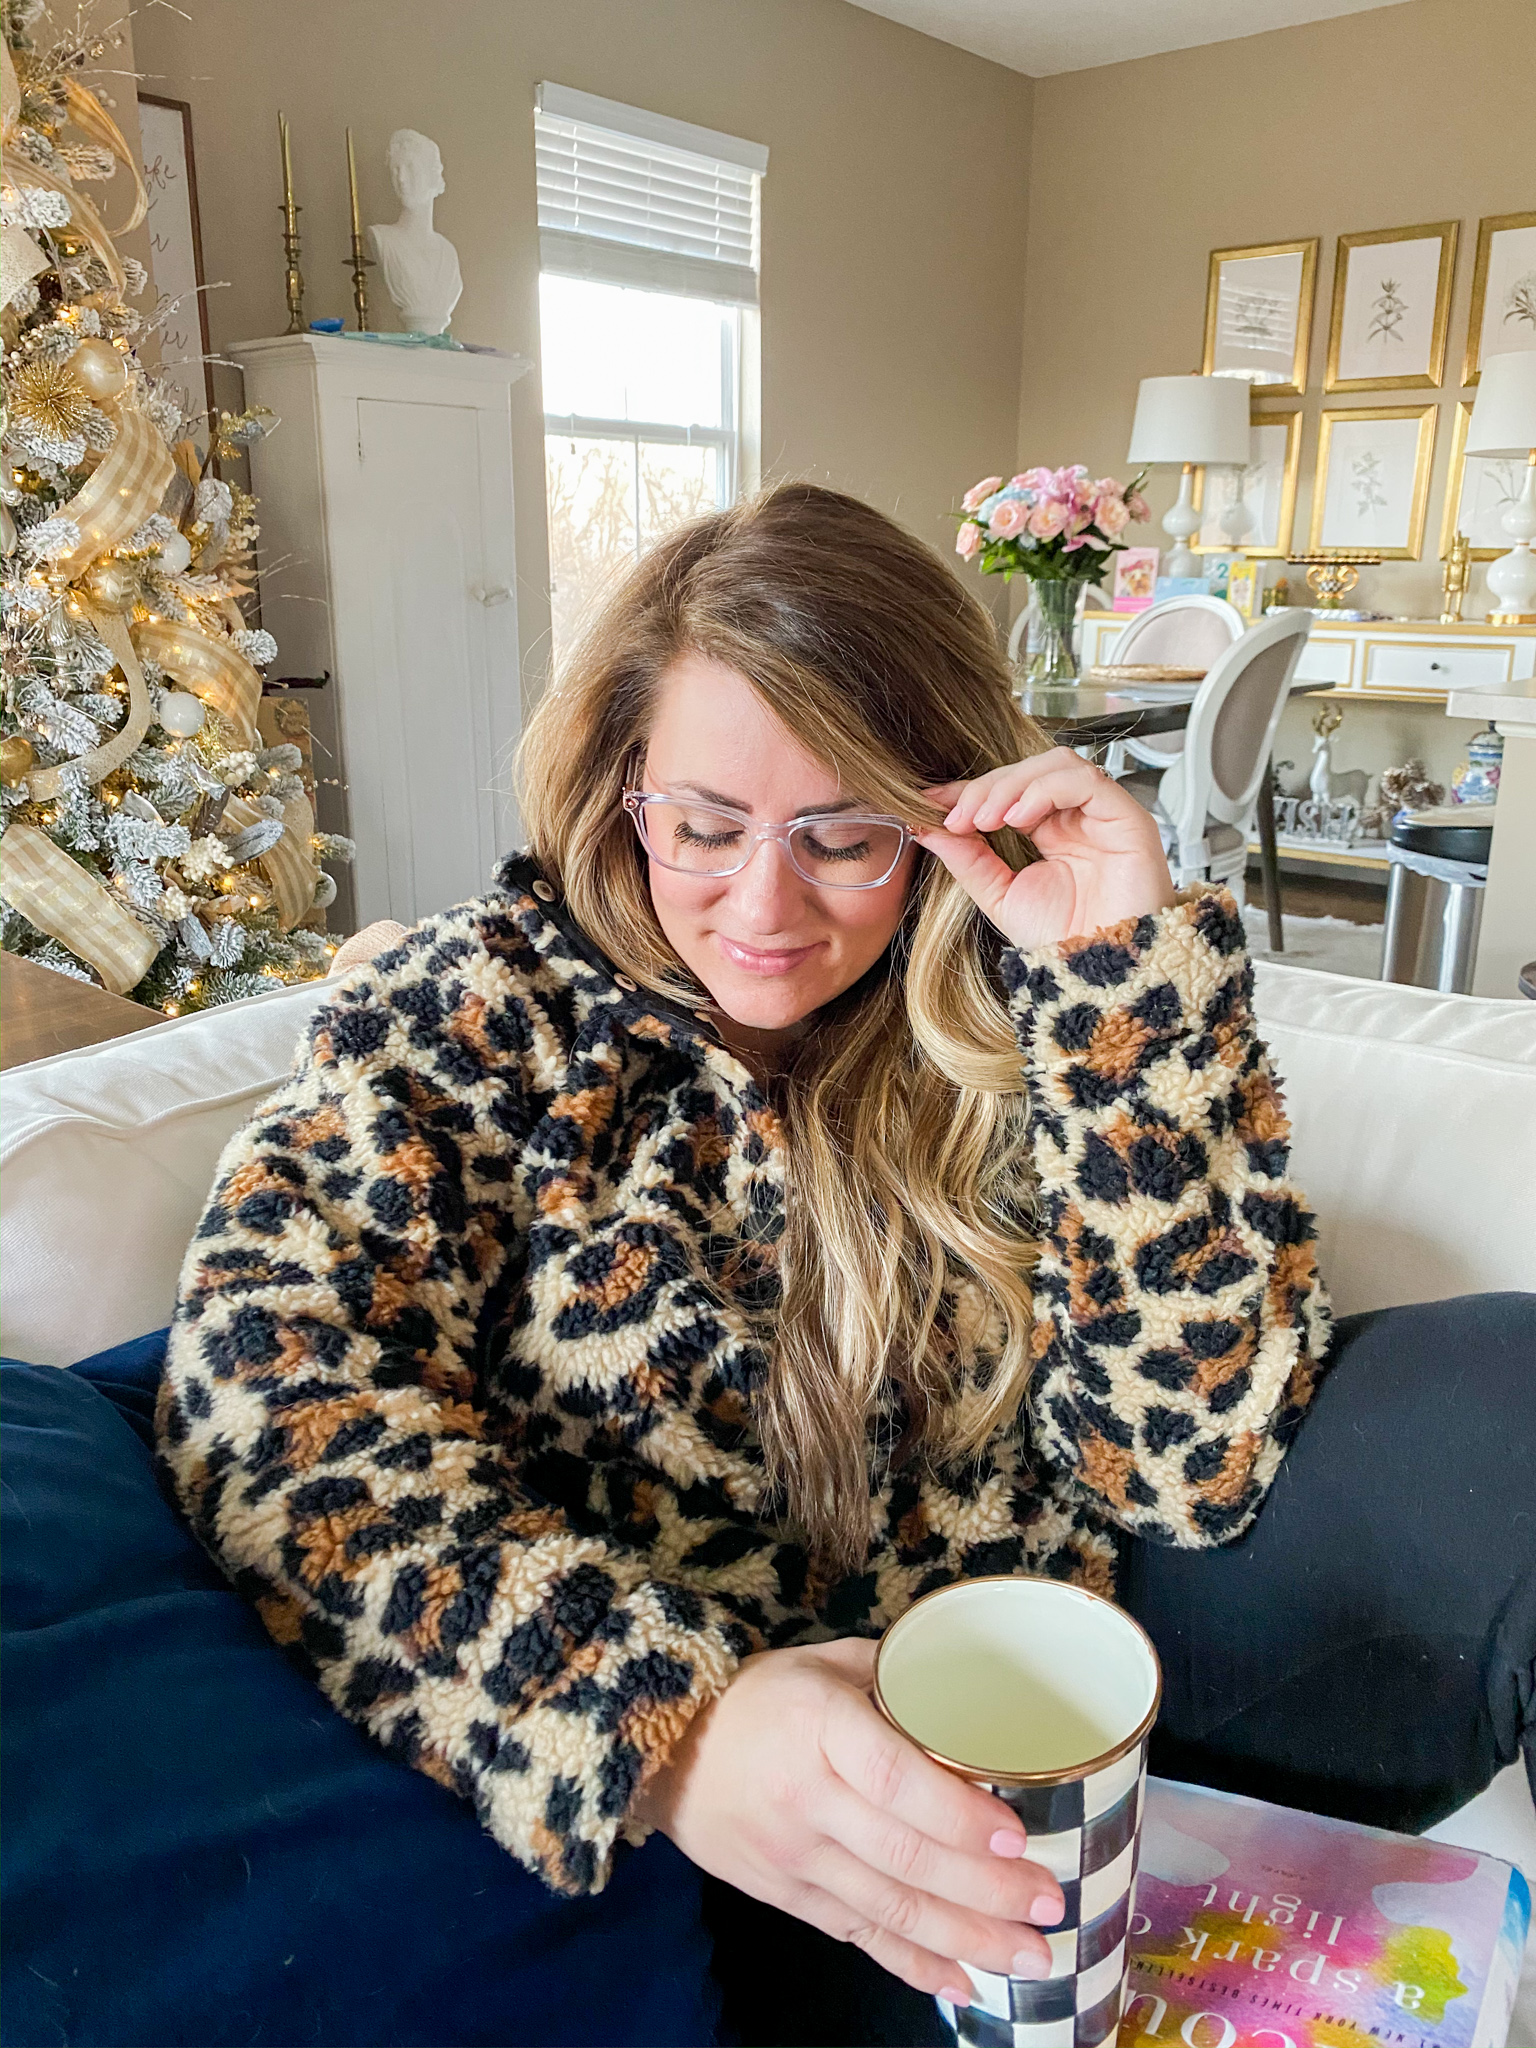 New Glasses with Lenscrafters at Macys by popular North Carolina life and style blog, Coffee Beans an Bobby Pins: image of a woman sitting on her couch and wearing glasses from Lenscrafters at Macys